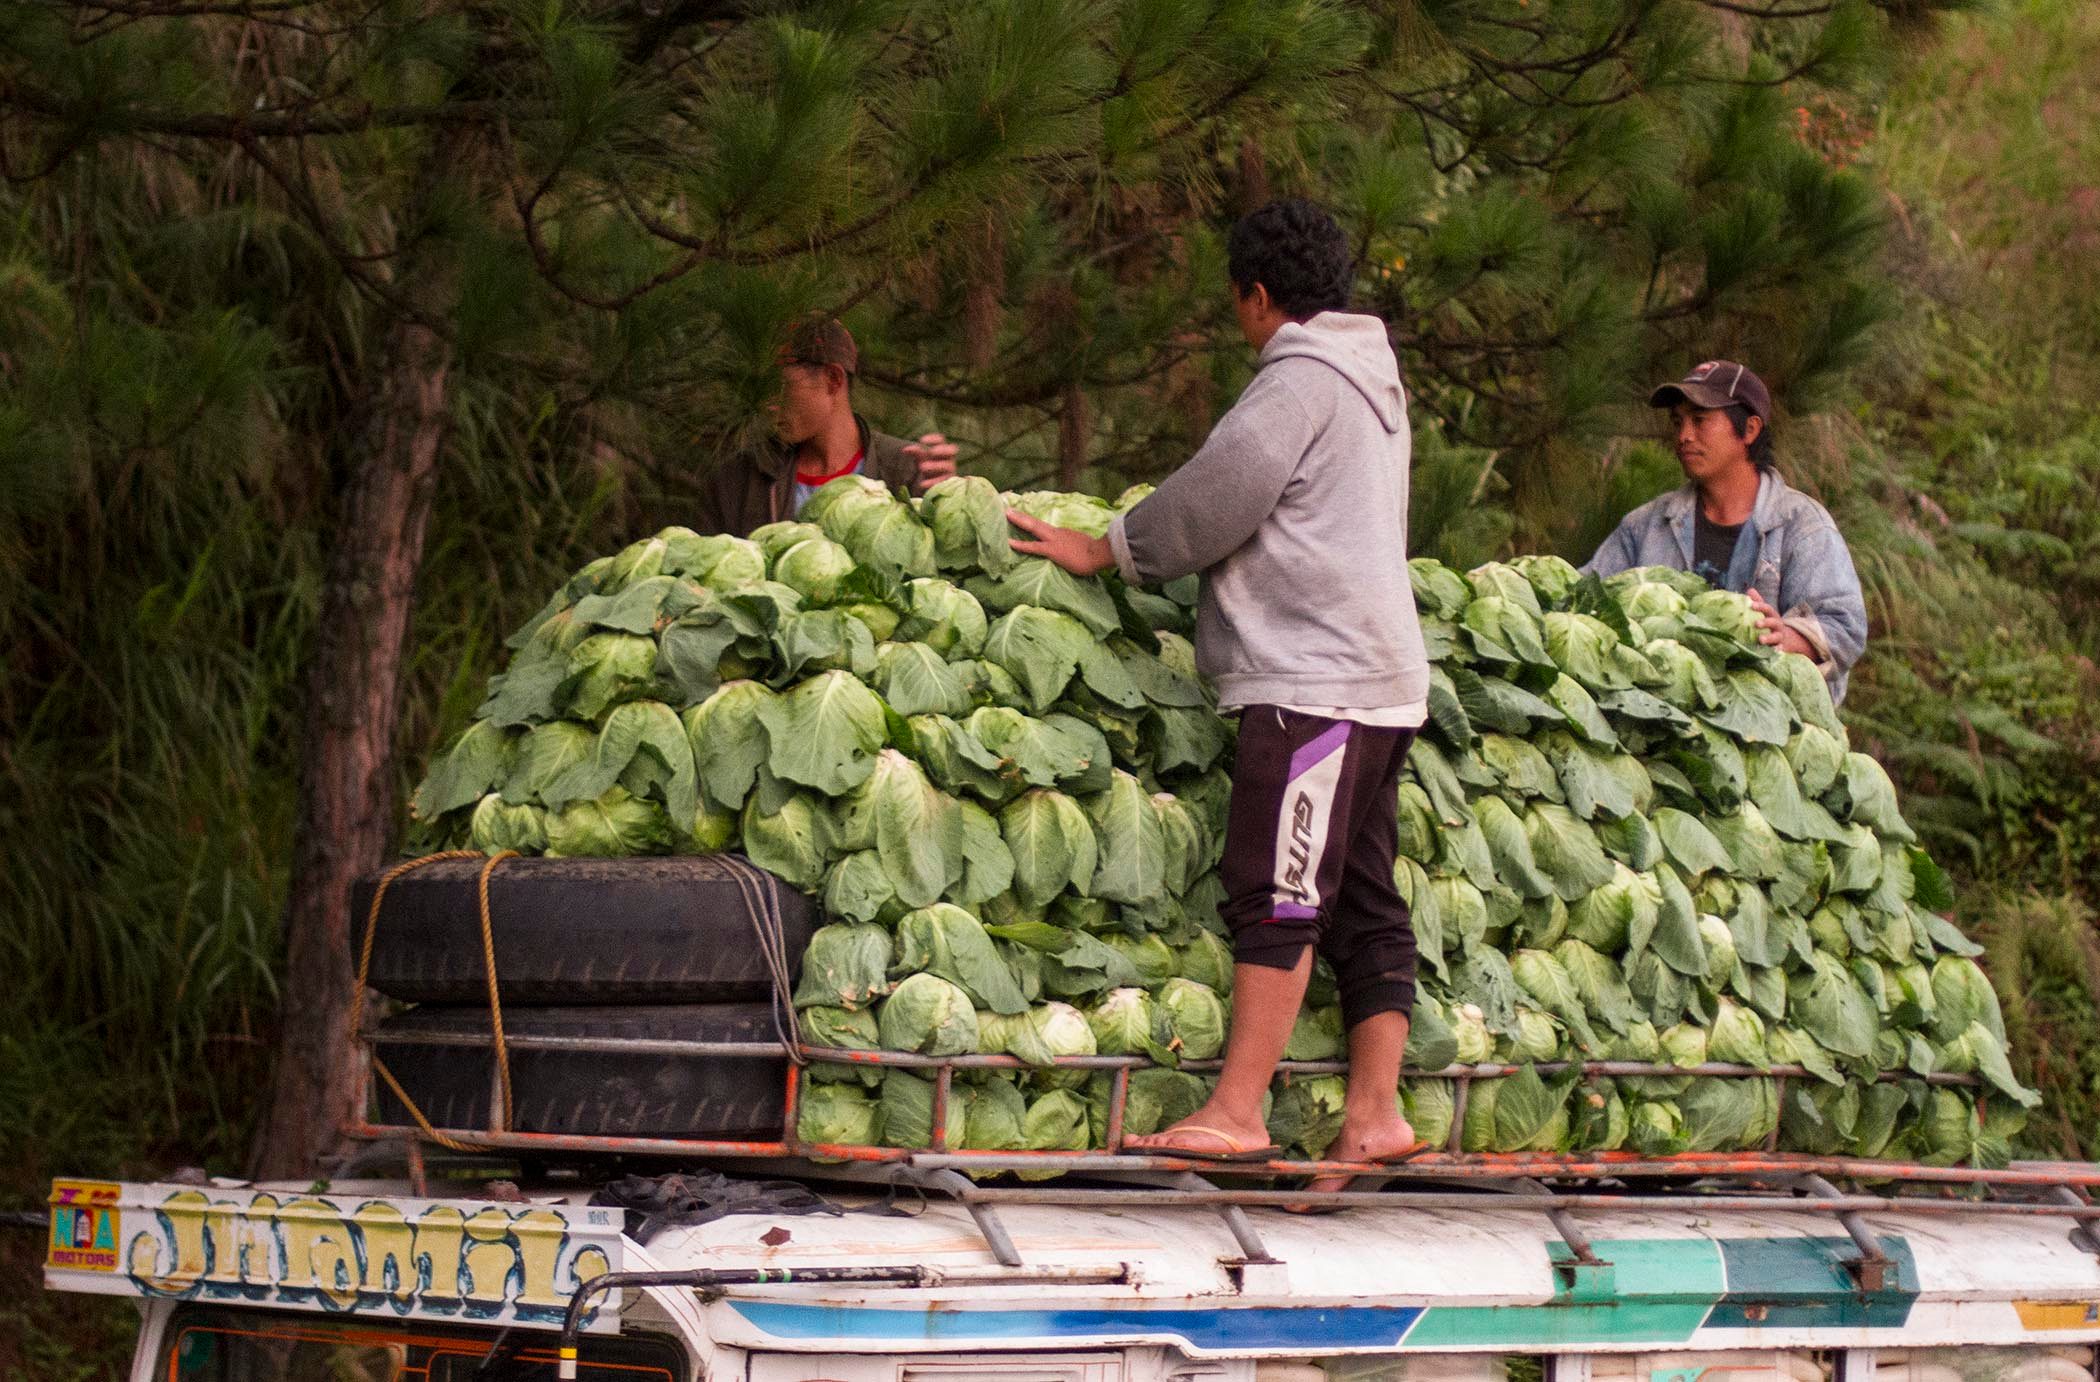 New marketing strategy needed? Cabbage farmers in Benguet reel from low prices